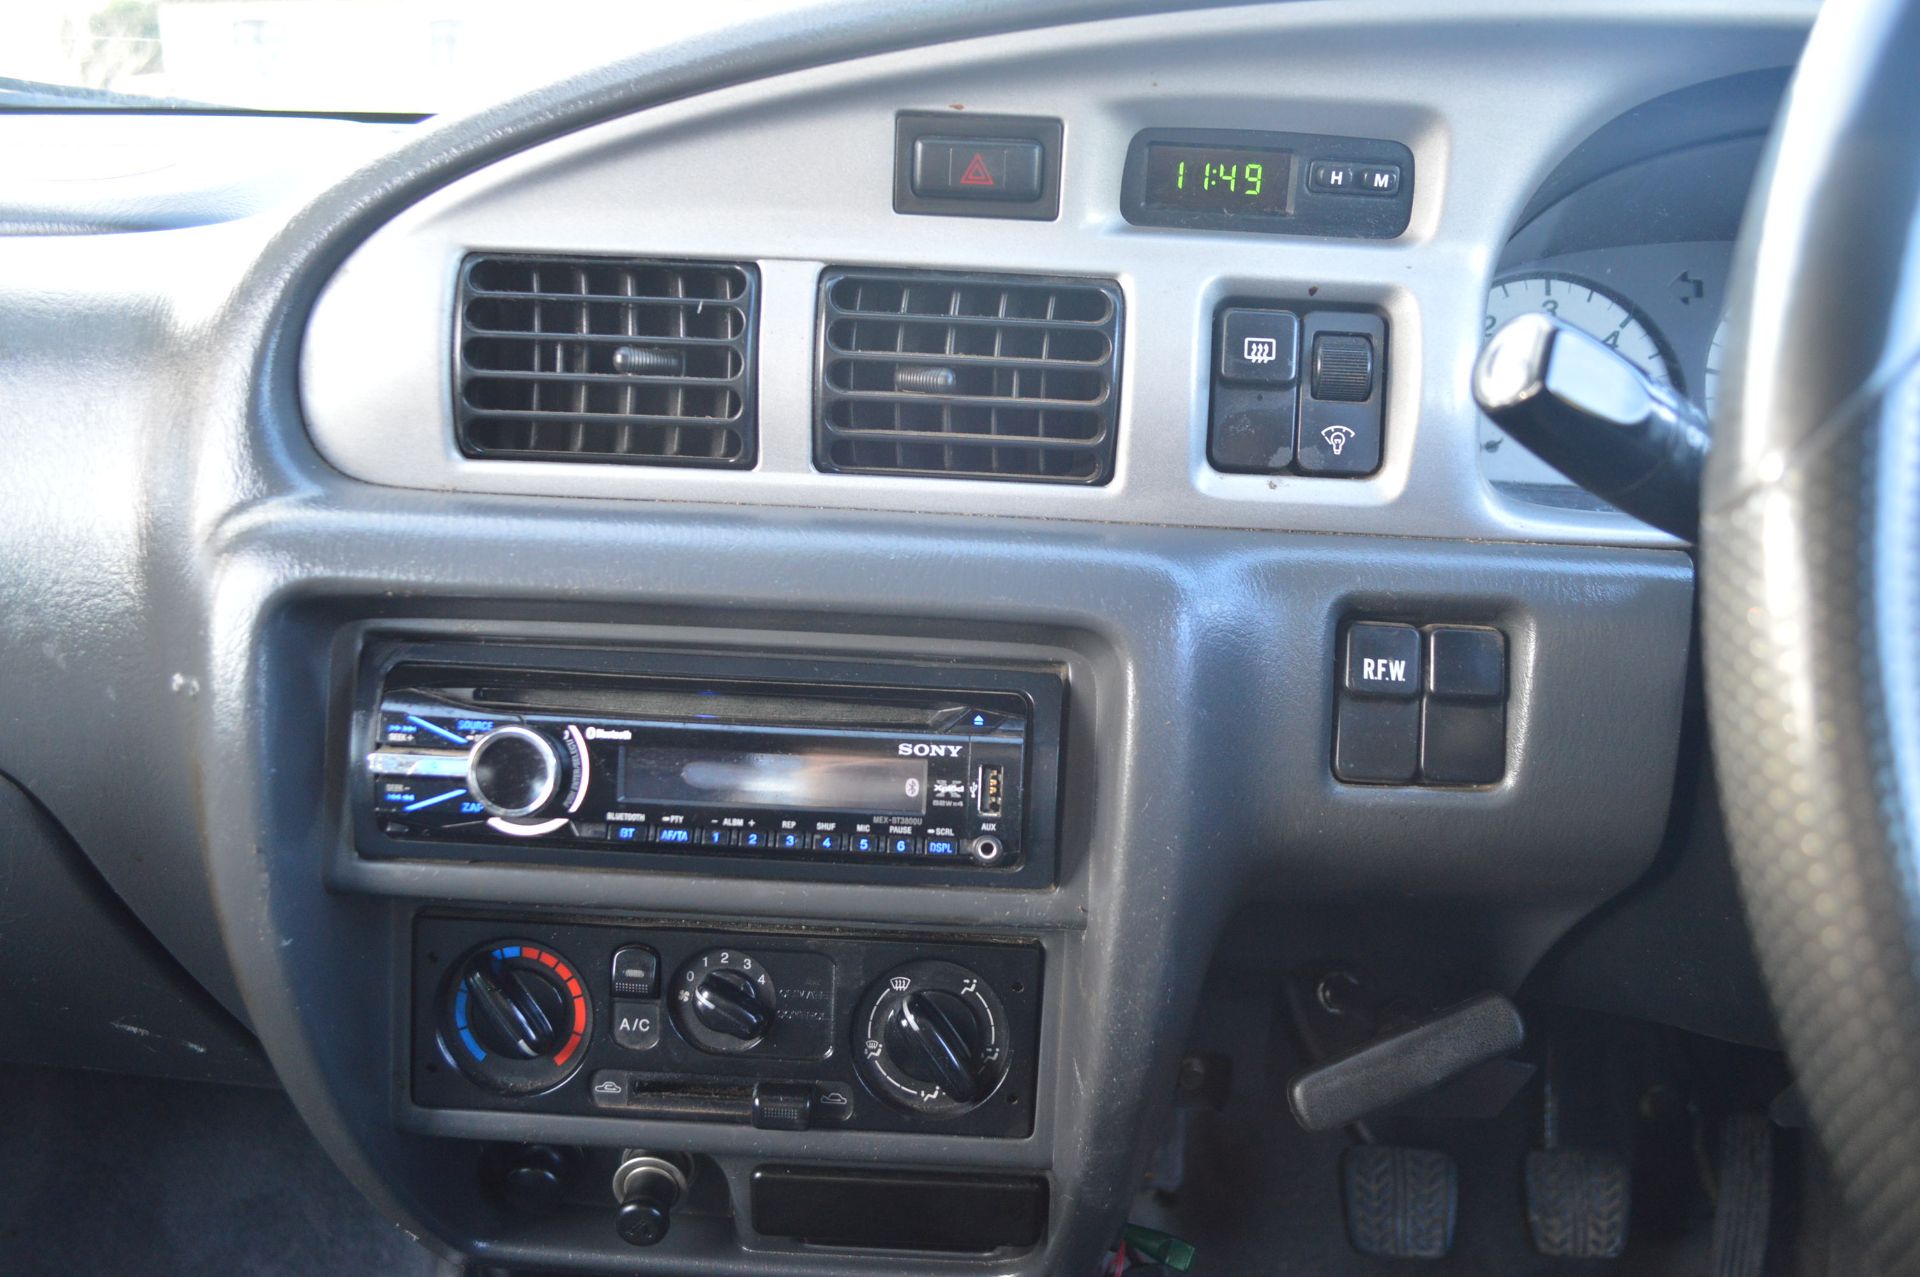 2005/05 REG BLUE MAZDA B2500 4X4 DOUBLE CAB TURBO DIESEL same ford ranger only cheaper! - Image 19 of 22